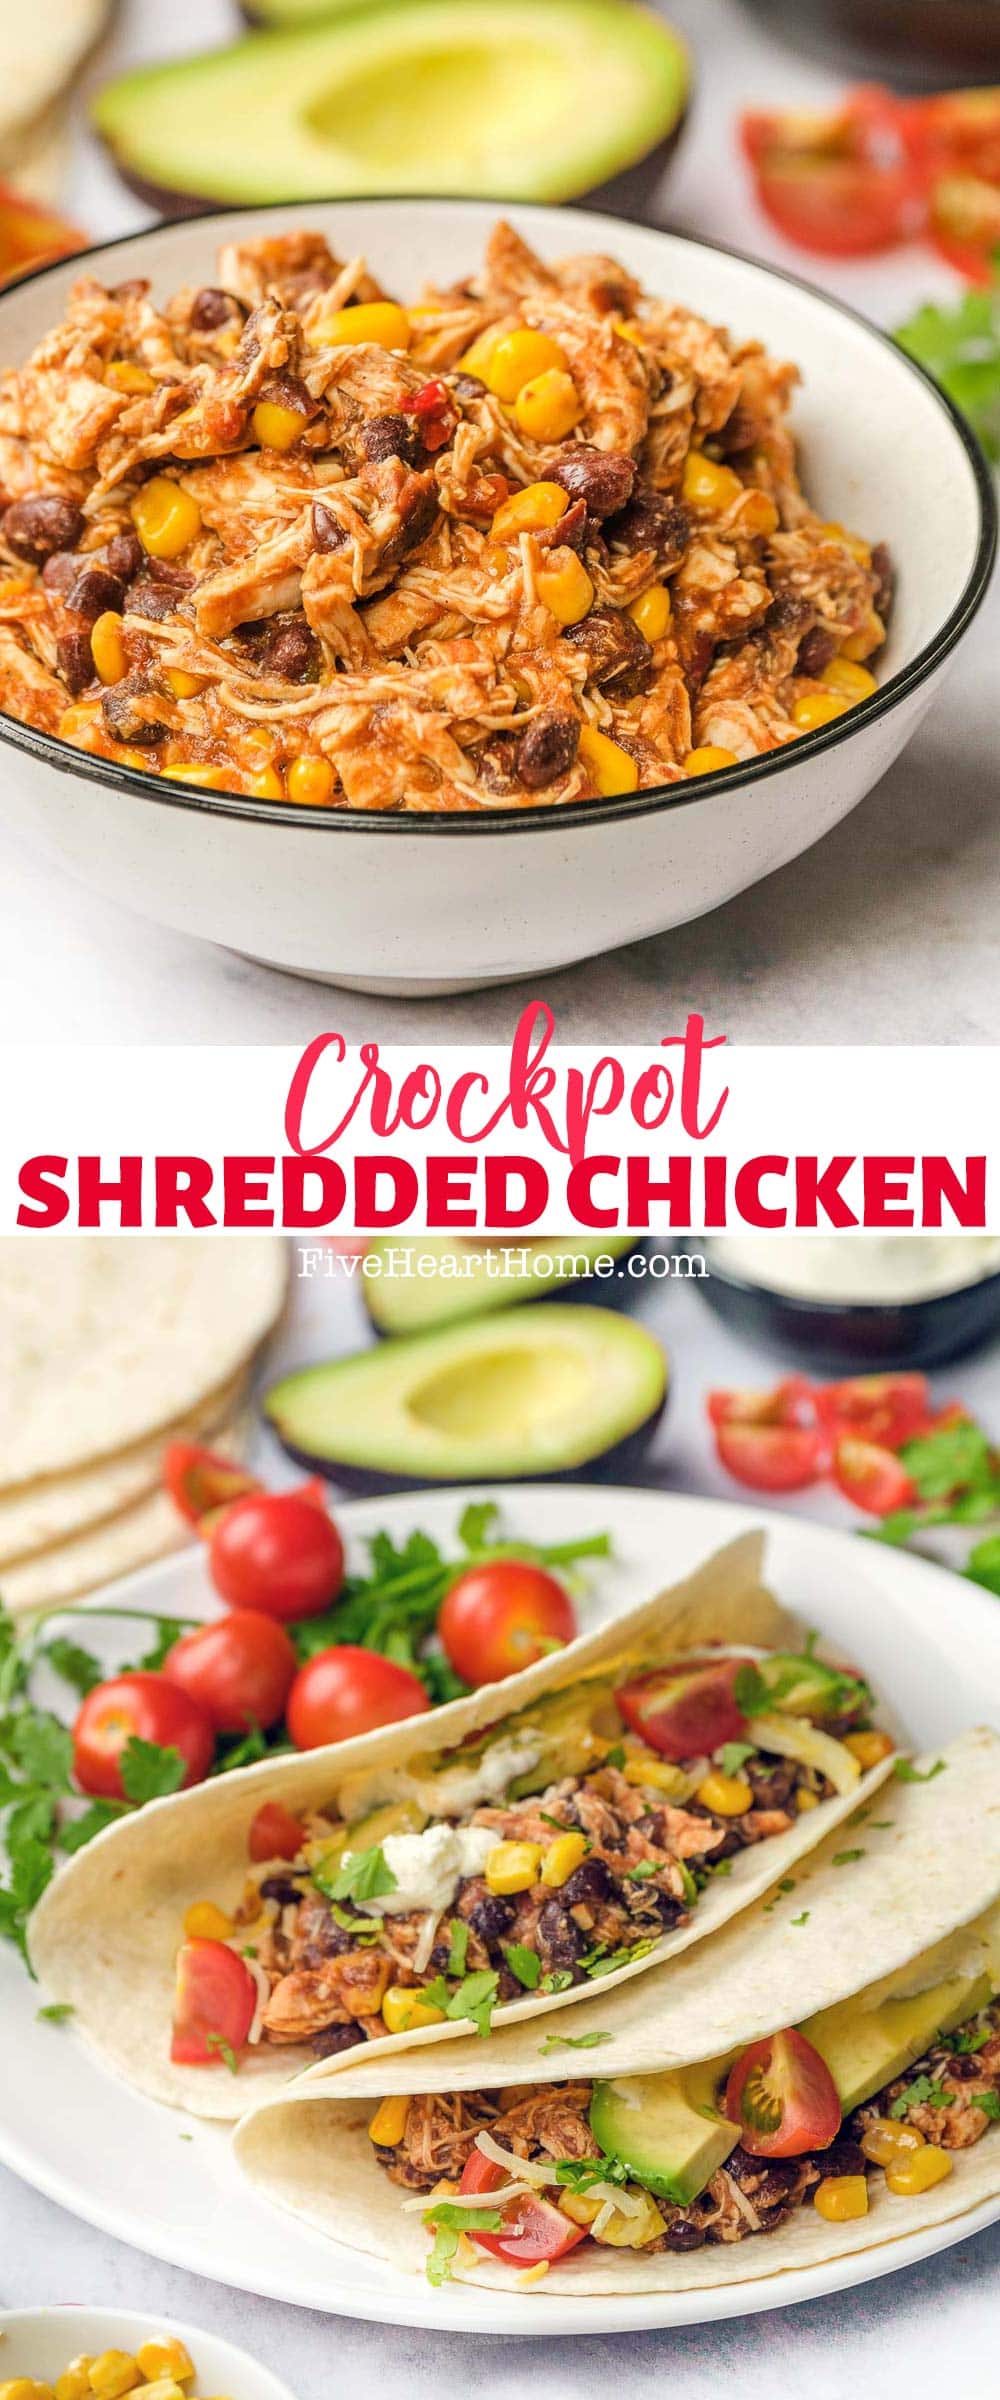 Crockpot Shredded Chicken Tacos ~ easy to make with just SIX simple ingredients: chicken, garlic, salsa, taco seasoning, black beans, and corn. This flavorful, versatile recipe for shredded chicken tacos is both delicious and effortless, since the slow cooker does all of the work! | FiveHeartHome.com via @fivehearthome